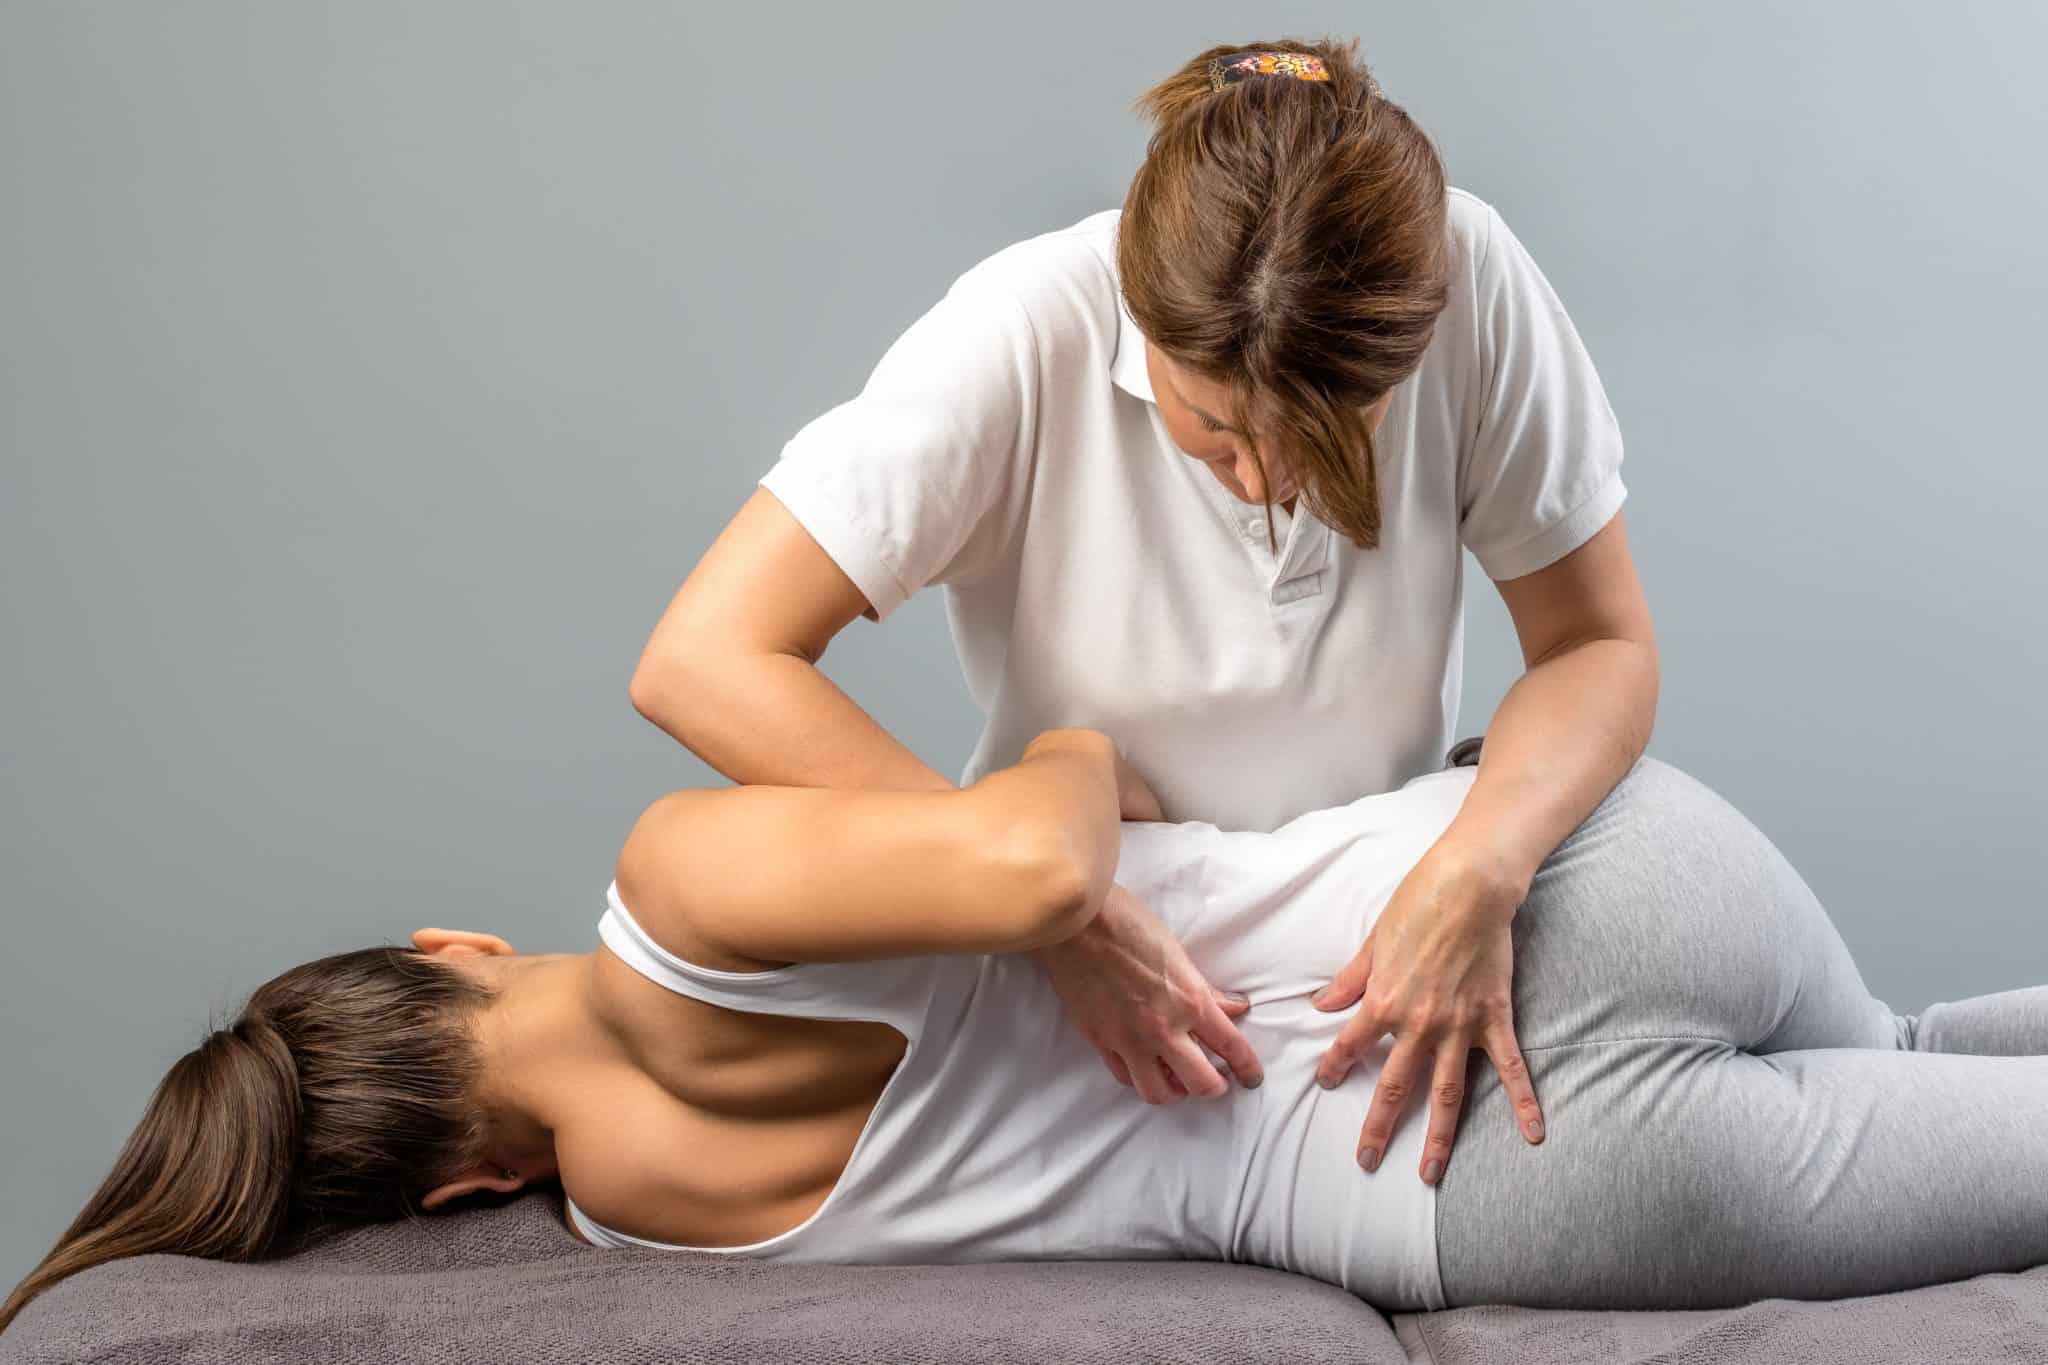 Chiropractor can Boost your Libido